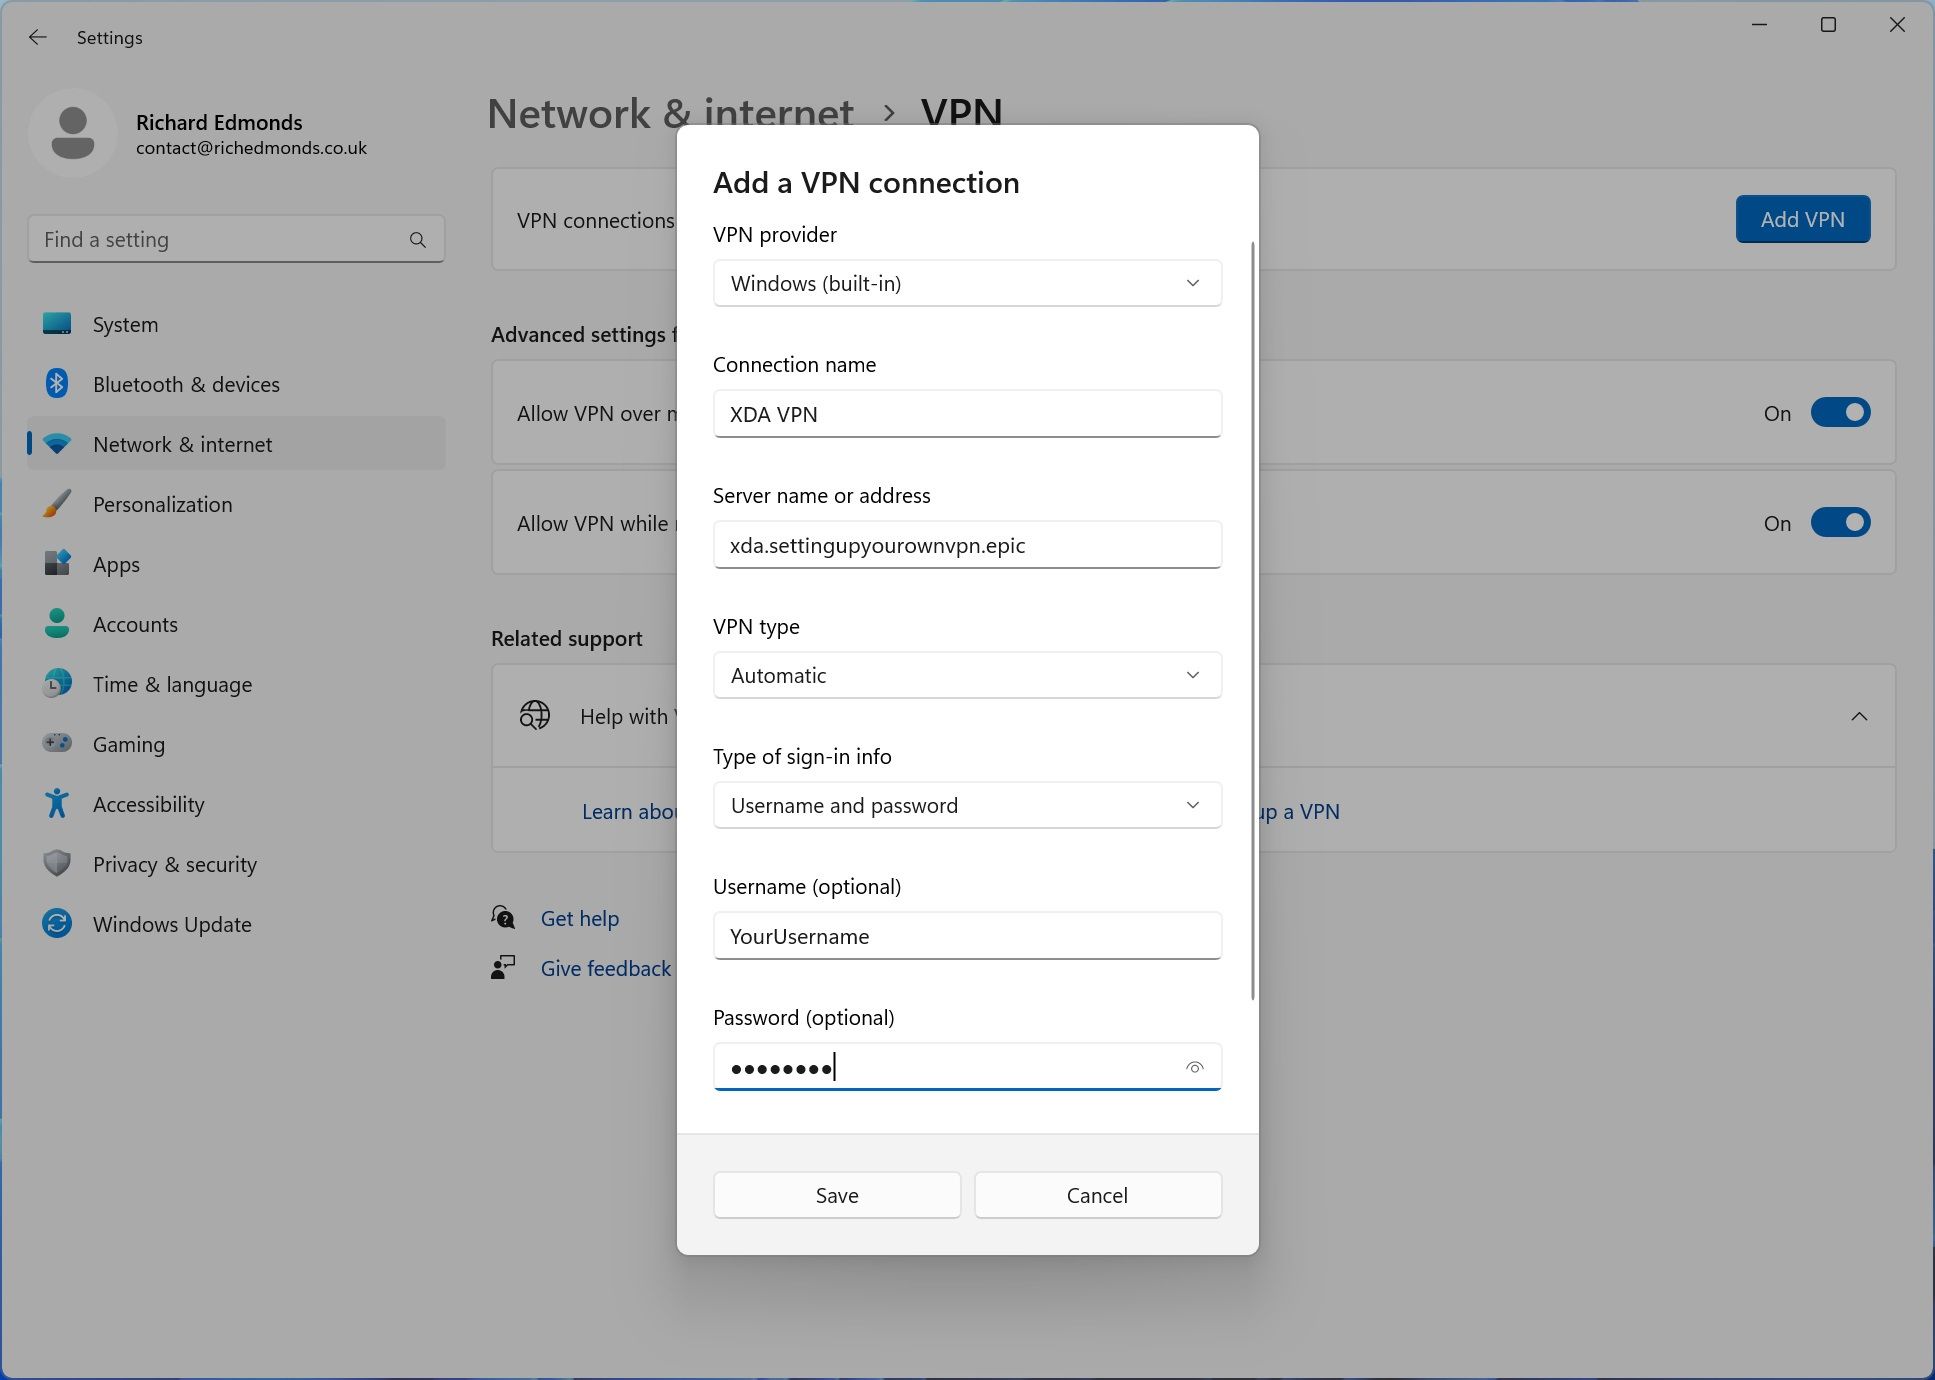 Configuring a new VPN connection in Windows 11